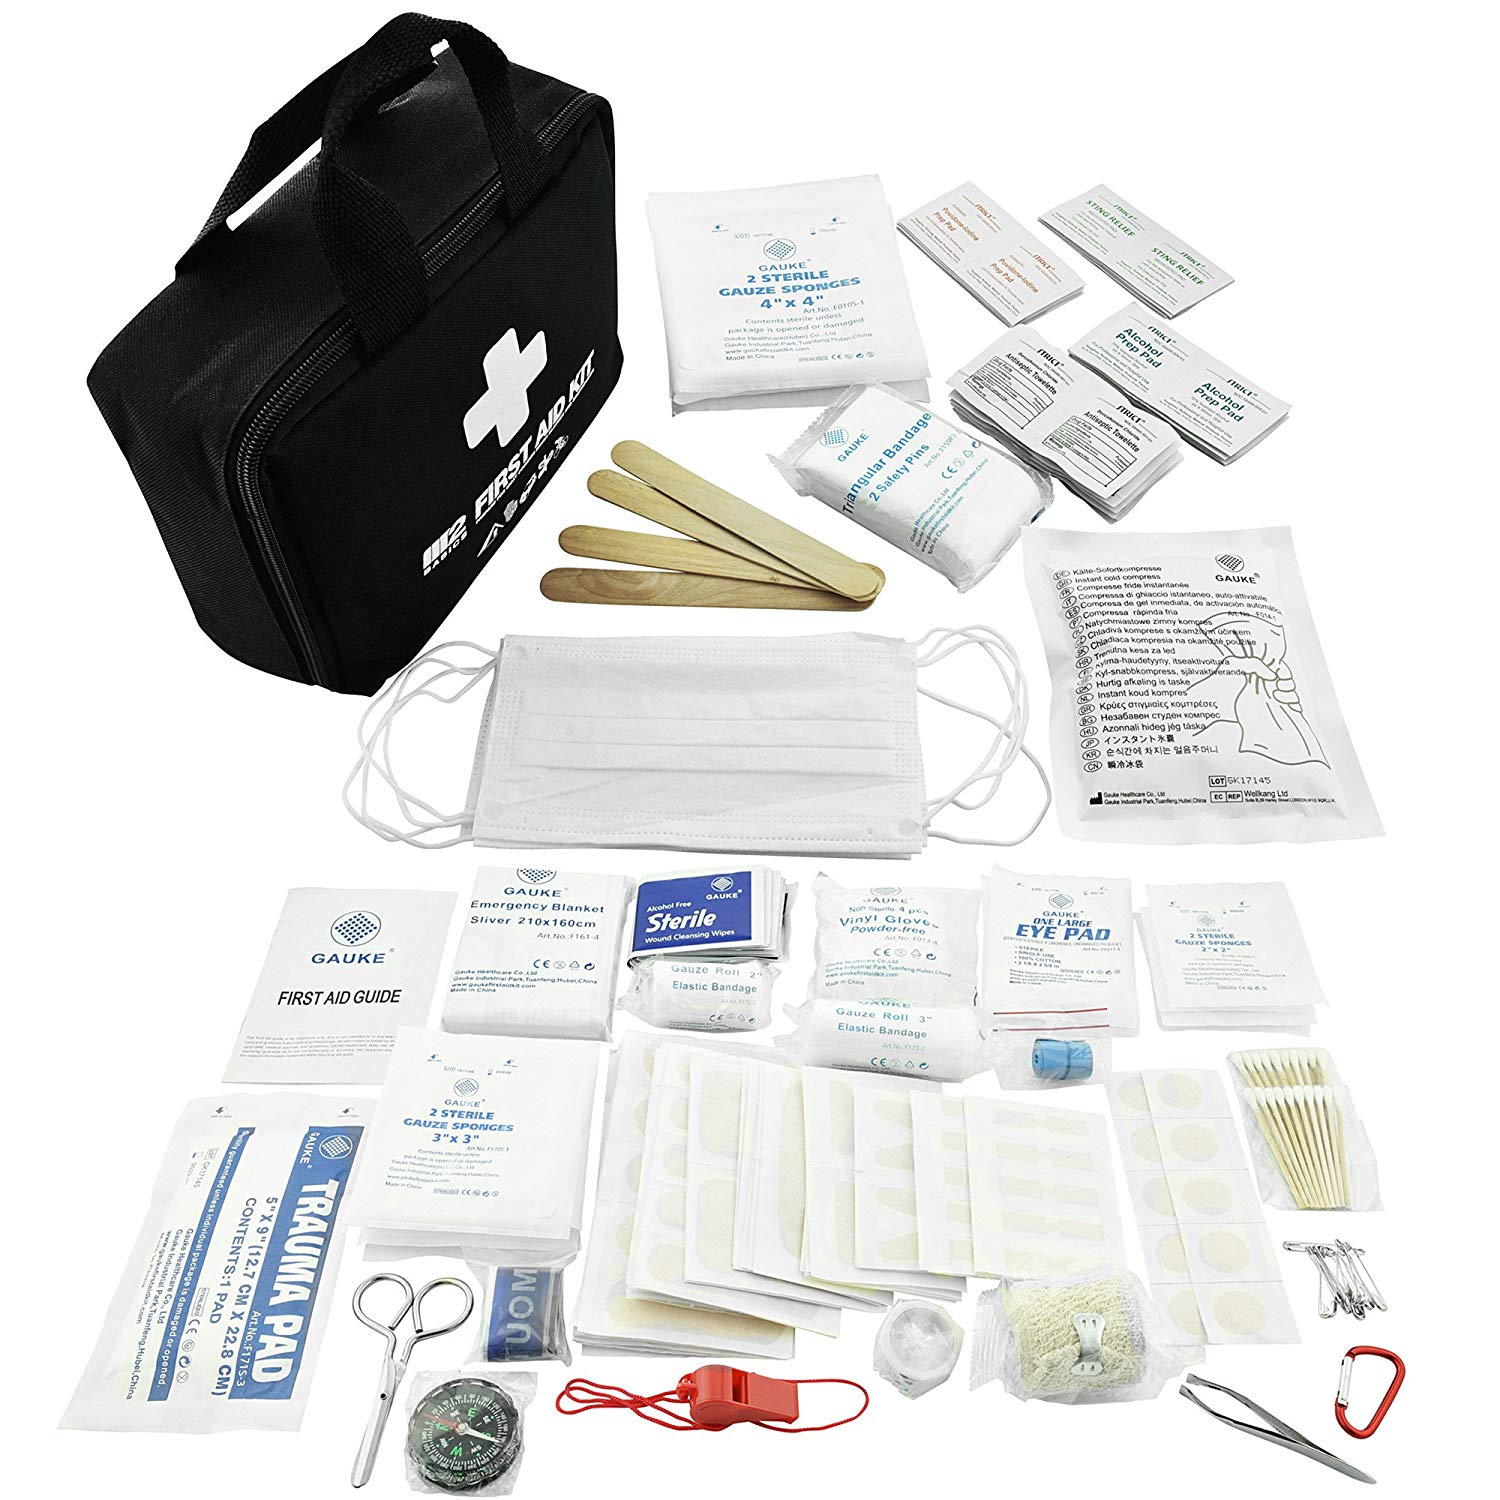  M2 BASICS Professional 300 Piece (40 Unique Items) First Aid Kit, Emergency Medical Kits